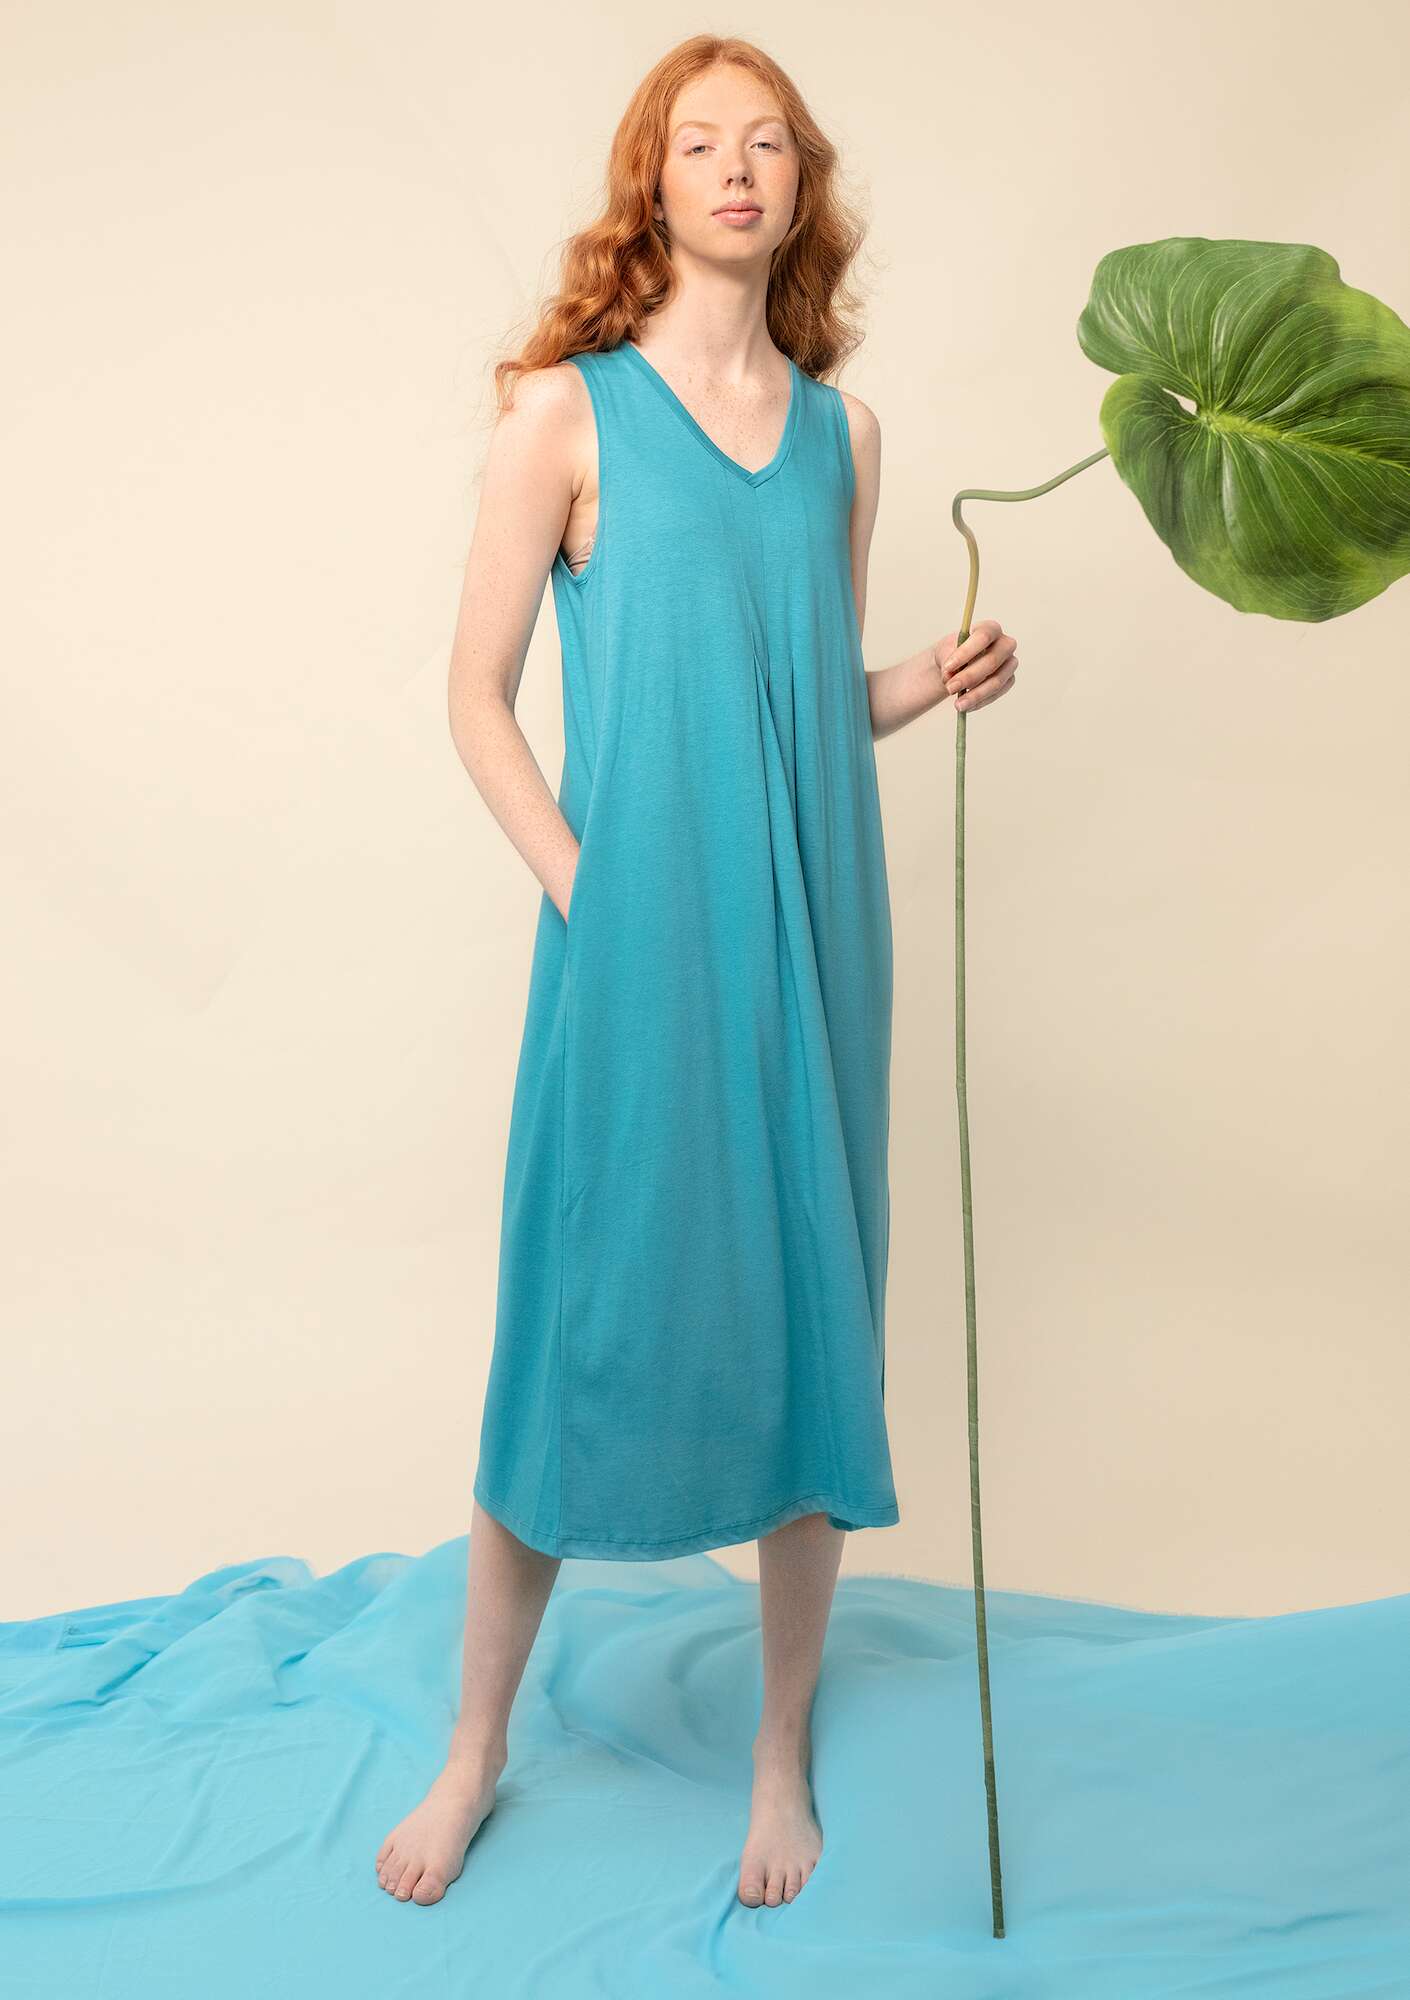 Solid-colored dress turquoise